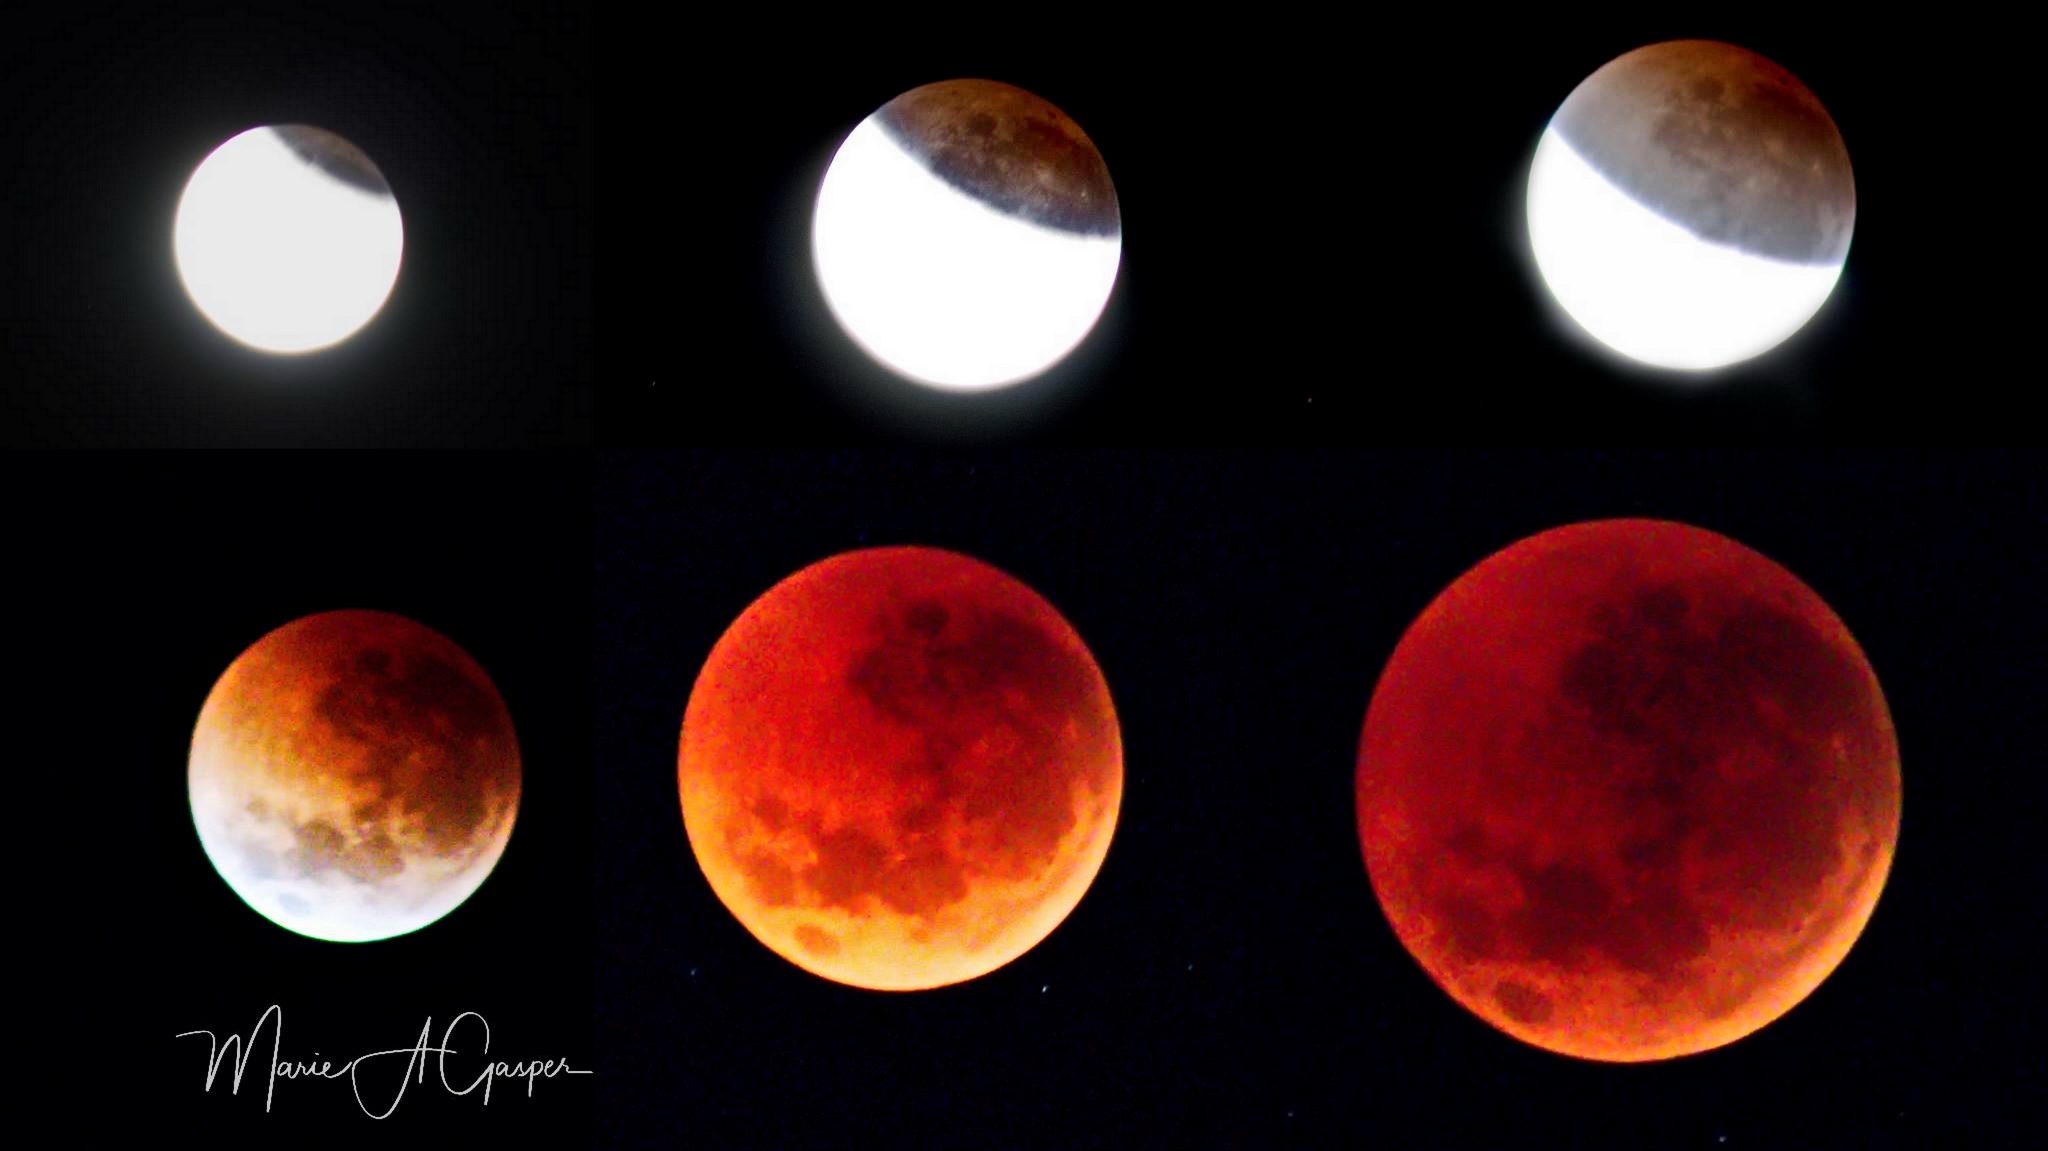 lunar eclipse time may 2021